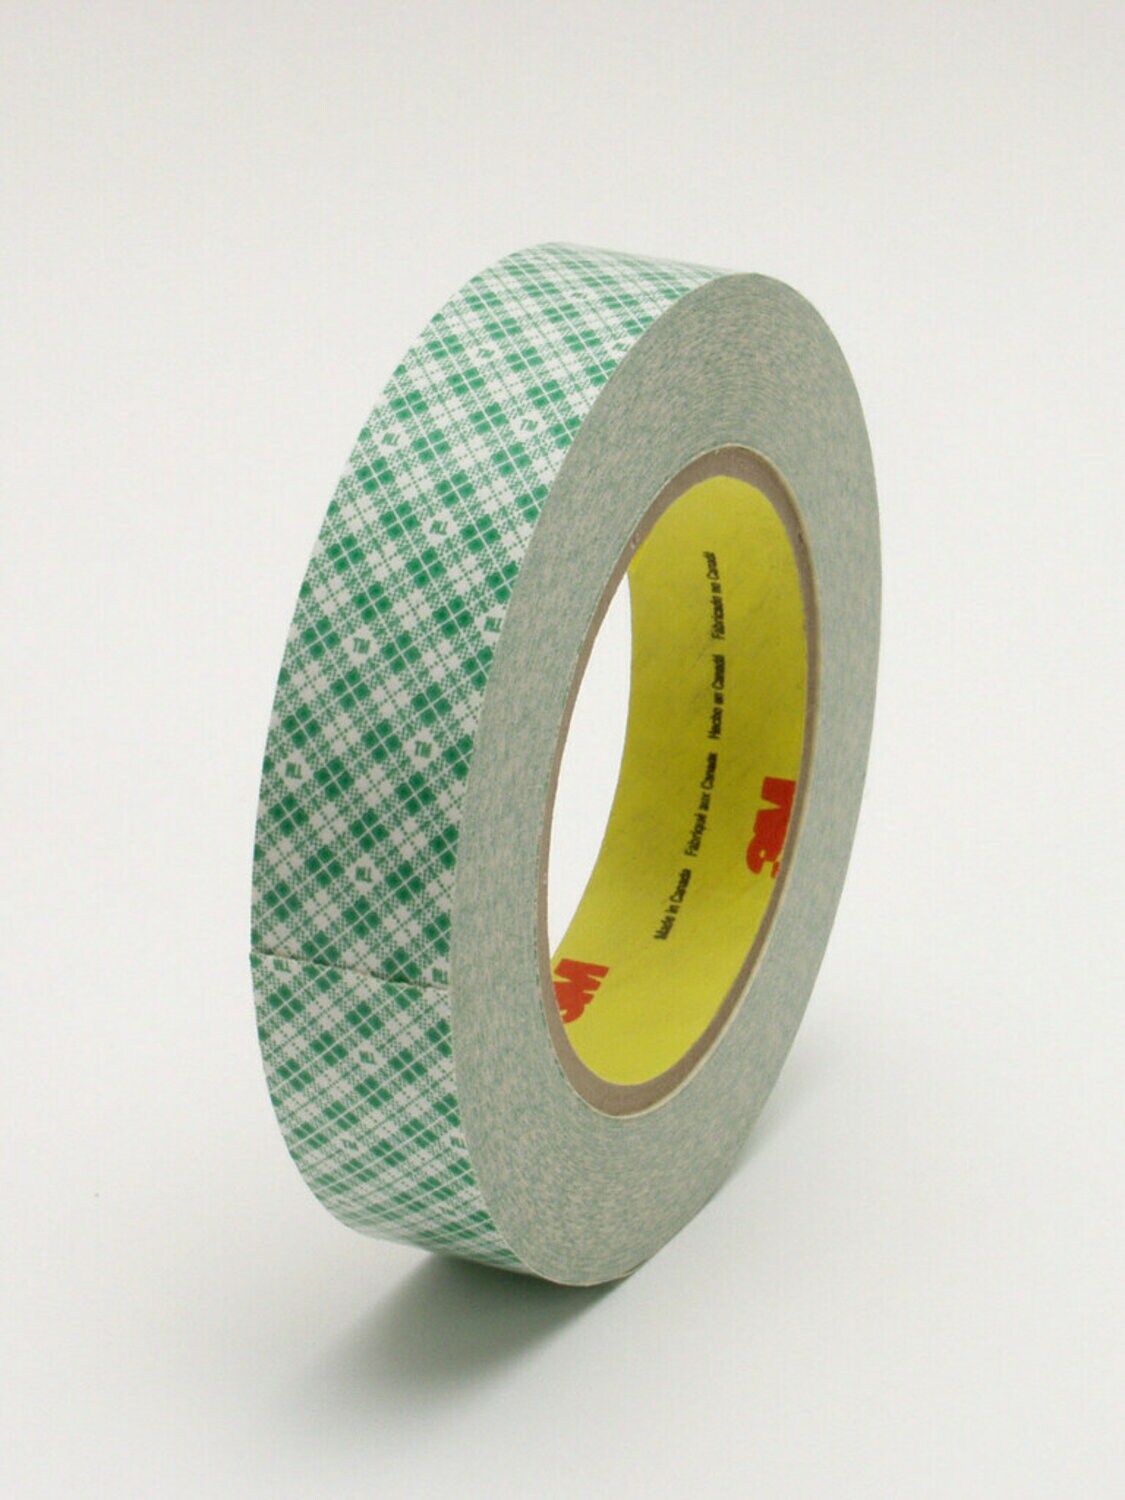 7010373963 - 3M Double Coated Paper Tape 410M, Natural, 2 in x 36 yd, 5 mil, Plastic
Core, 24 rolls per case